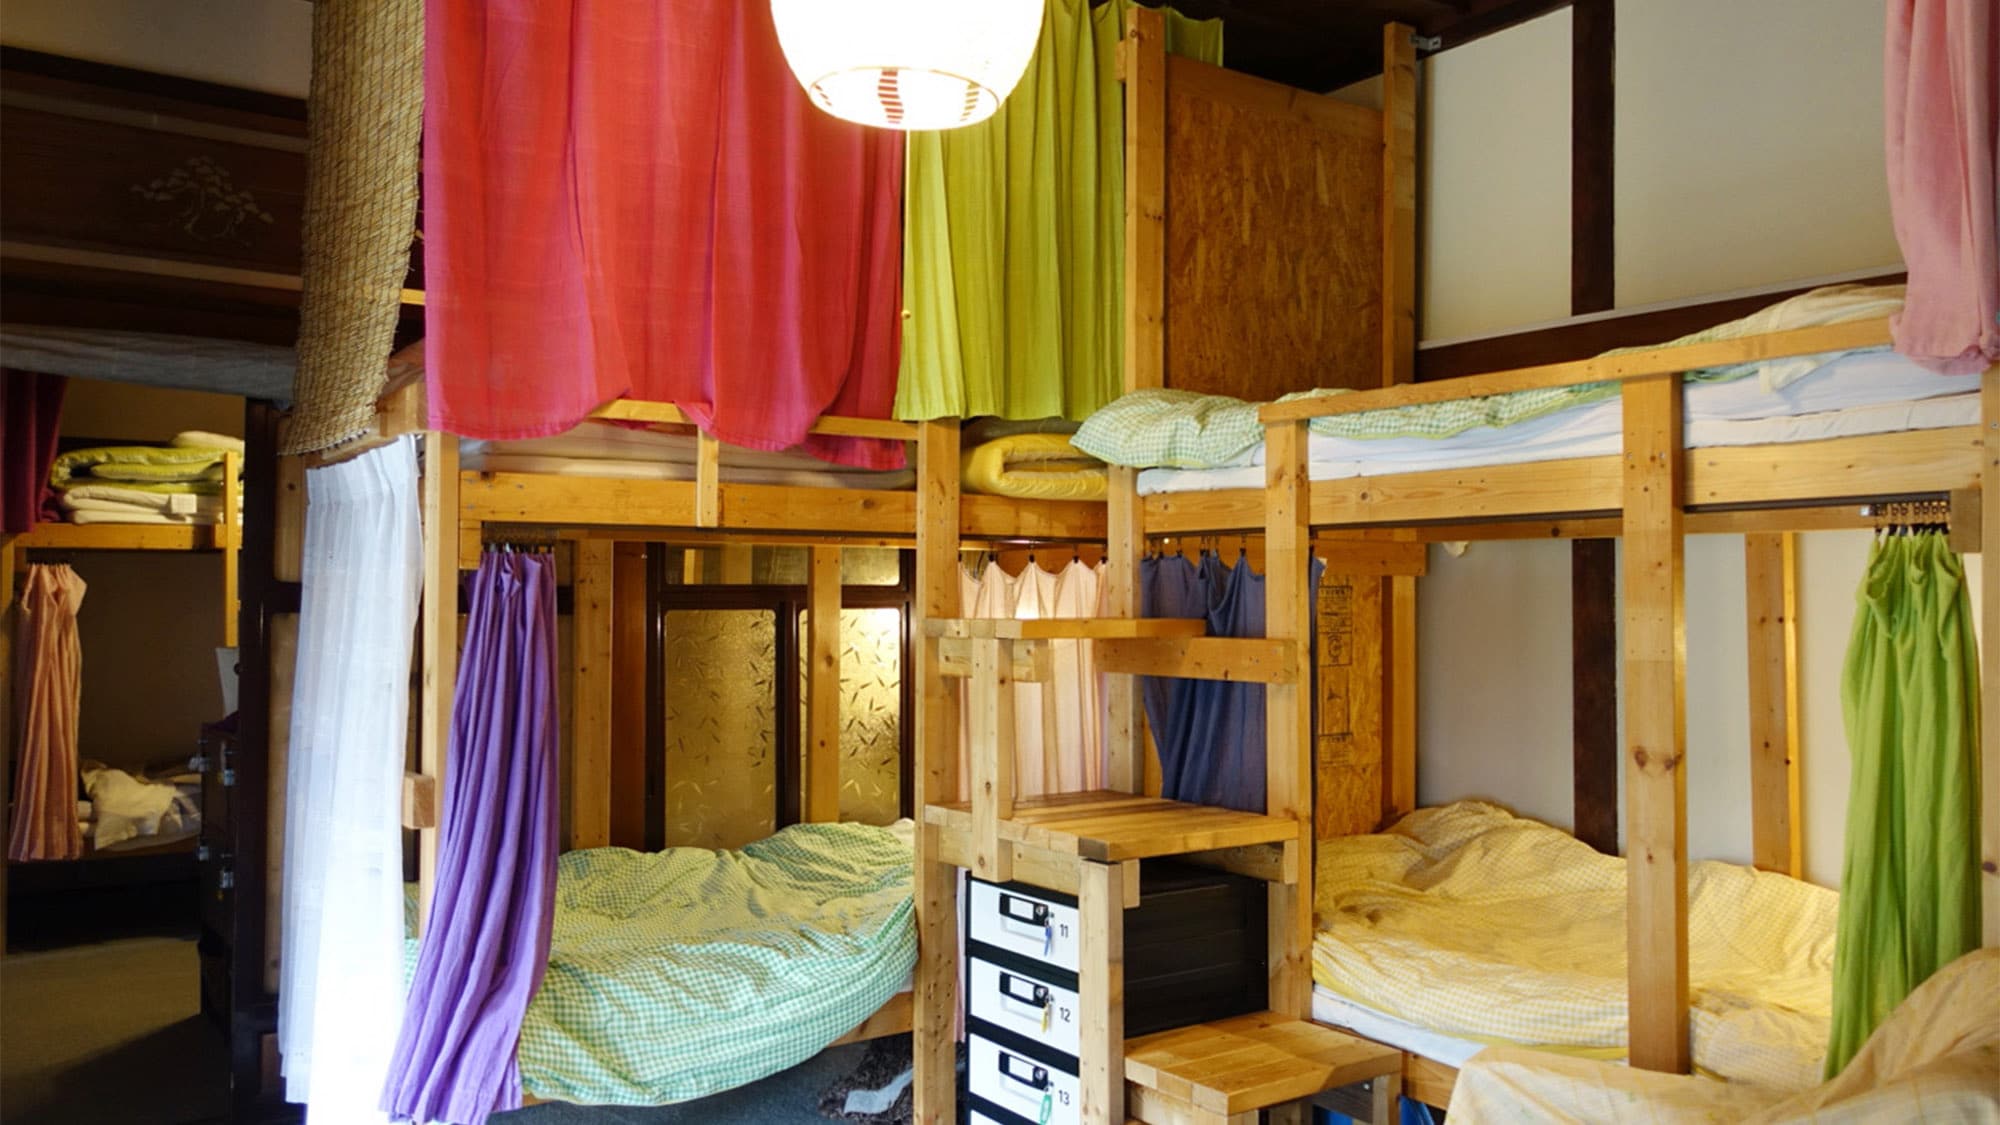 ・ Dormitory (all bunk beds, shared room)